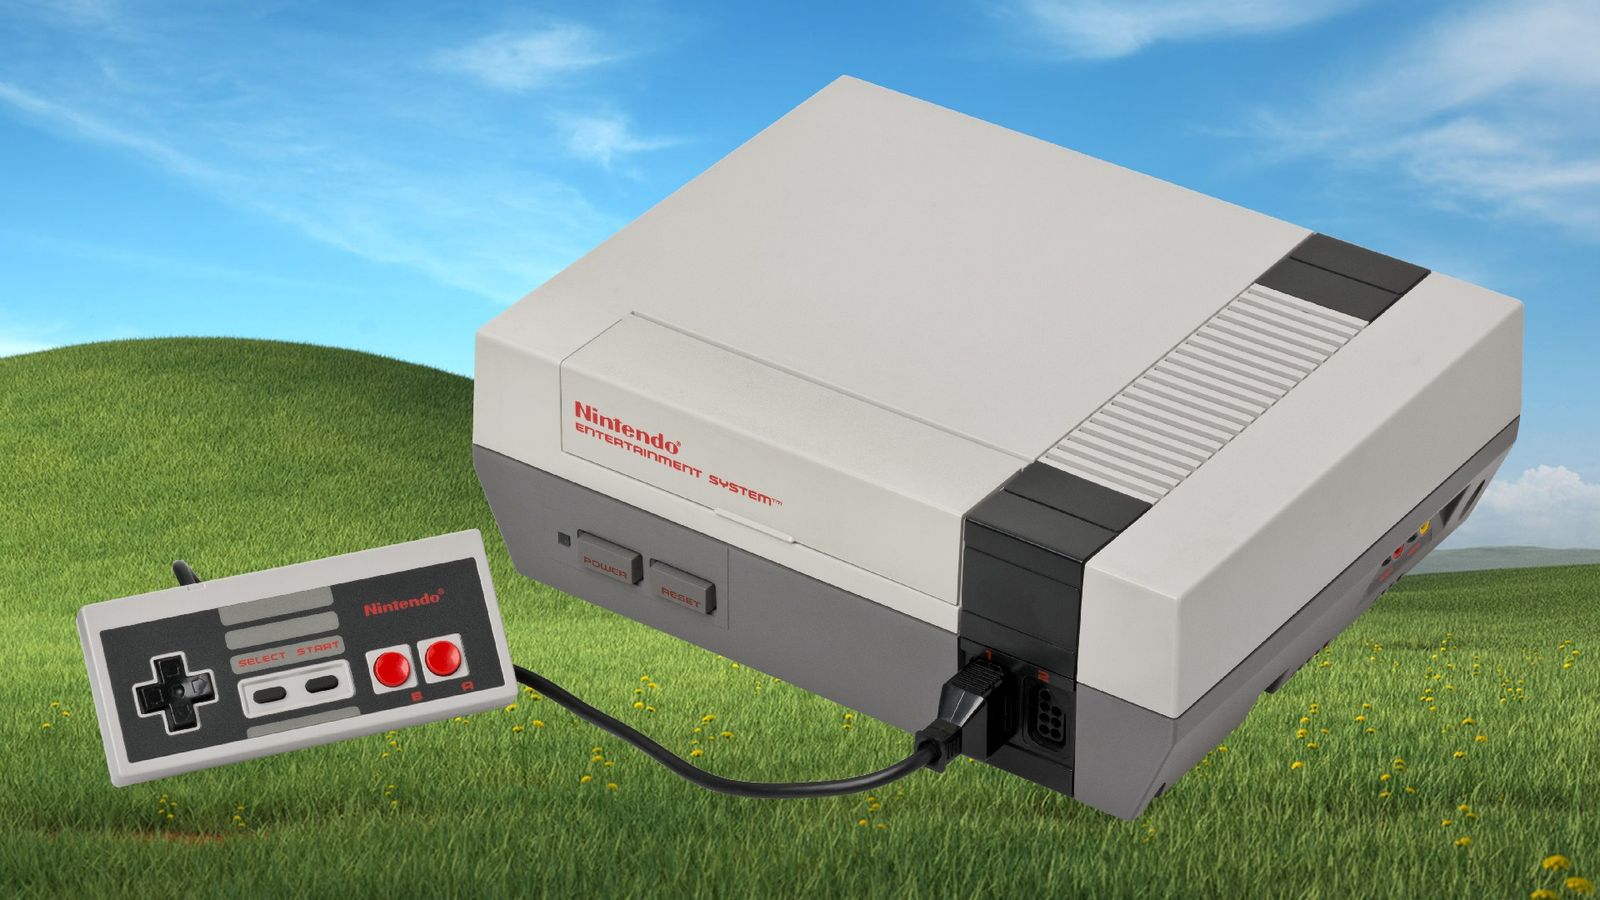 The old Microsoft hills background with a Nintendo NES in front of it